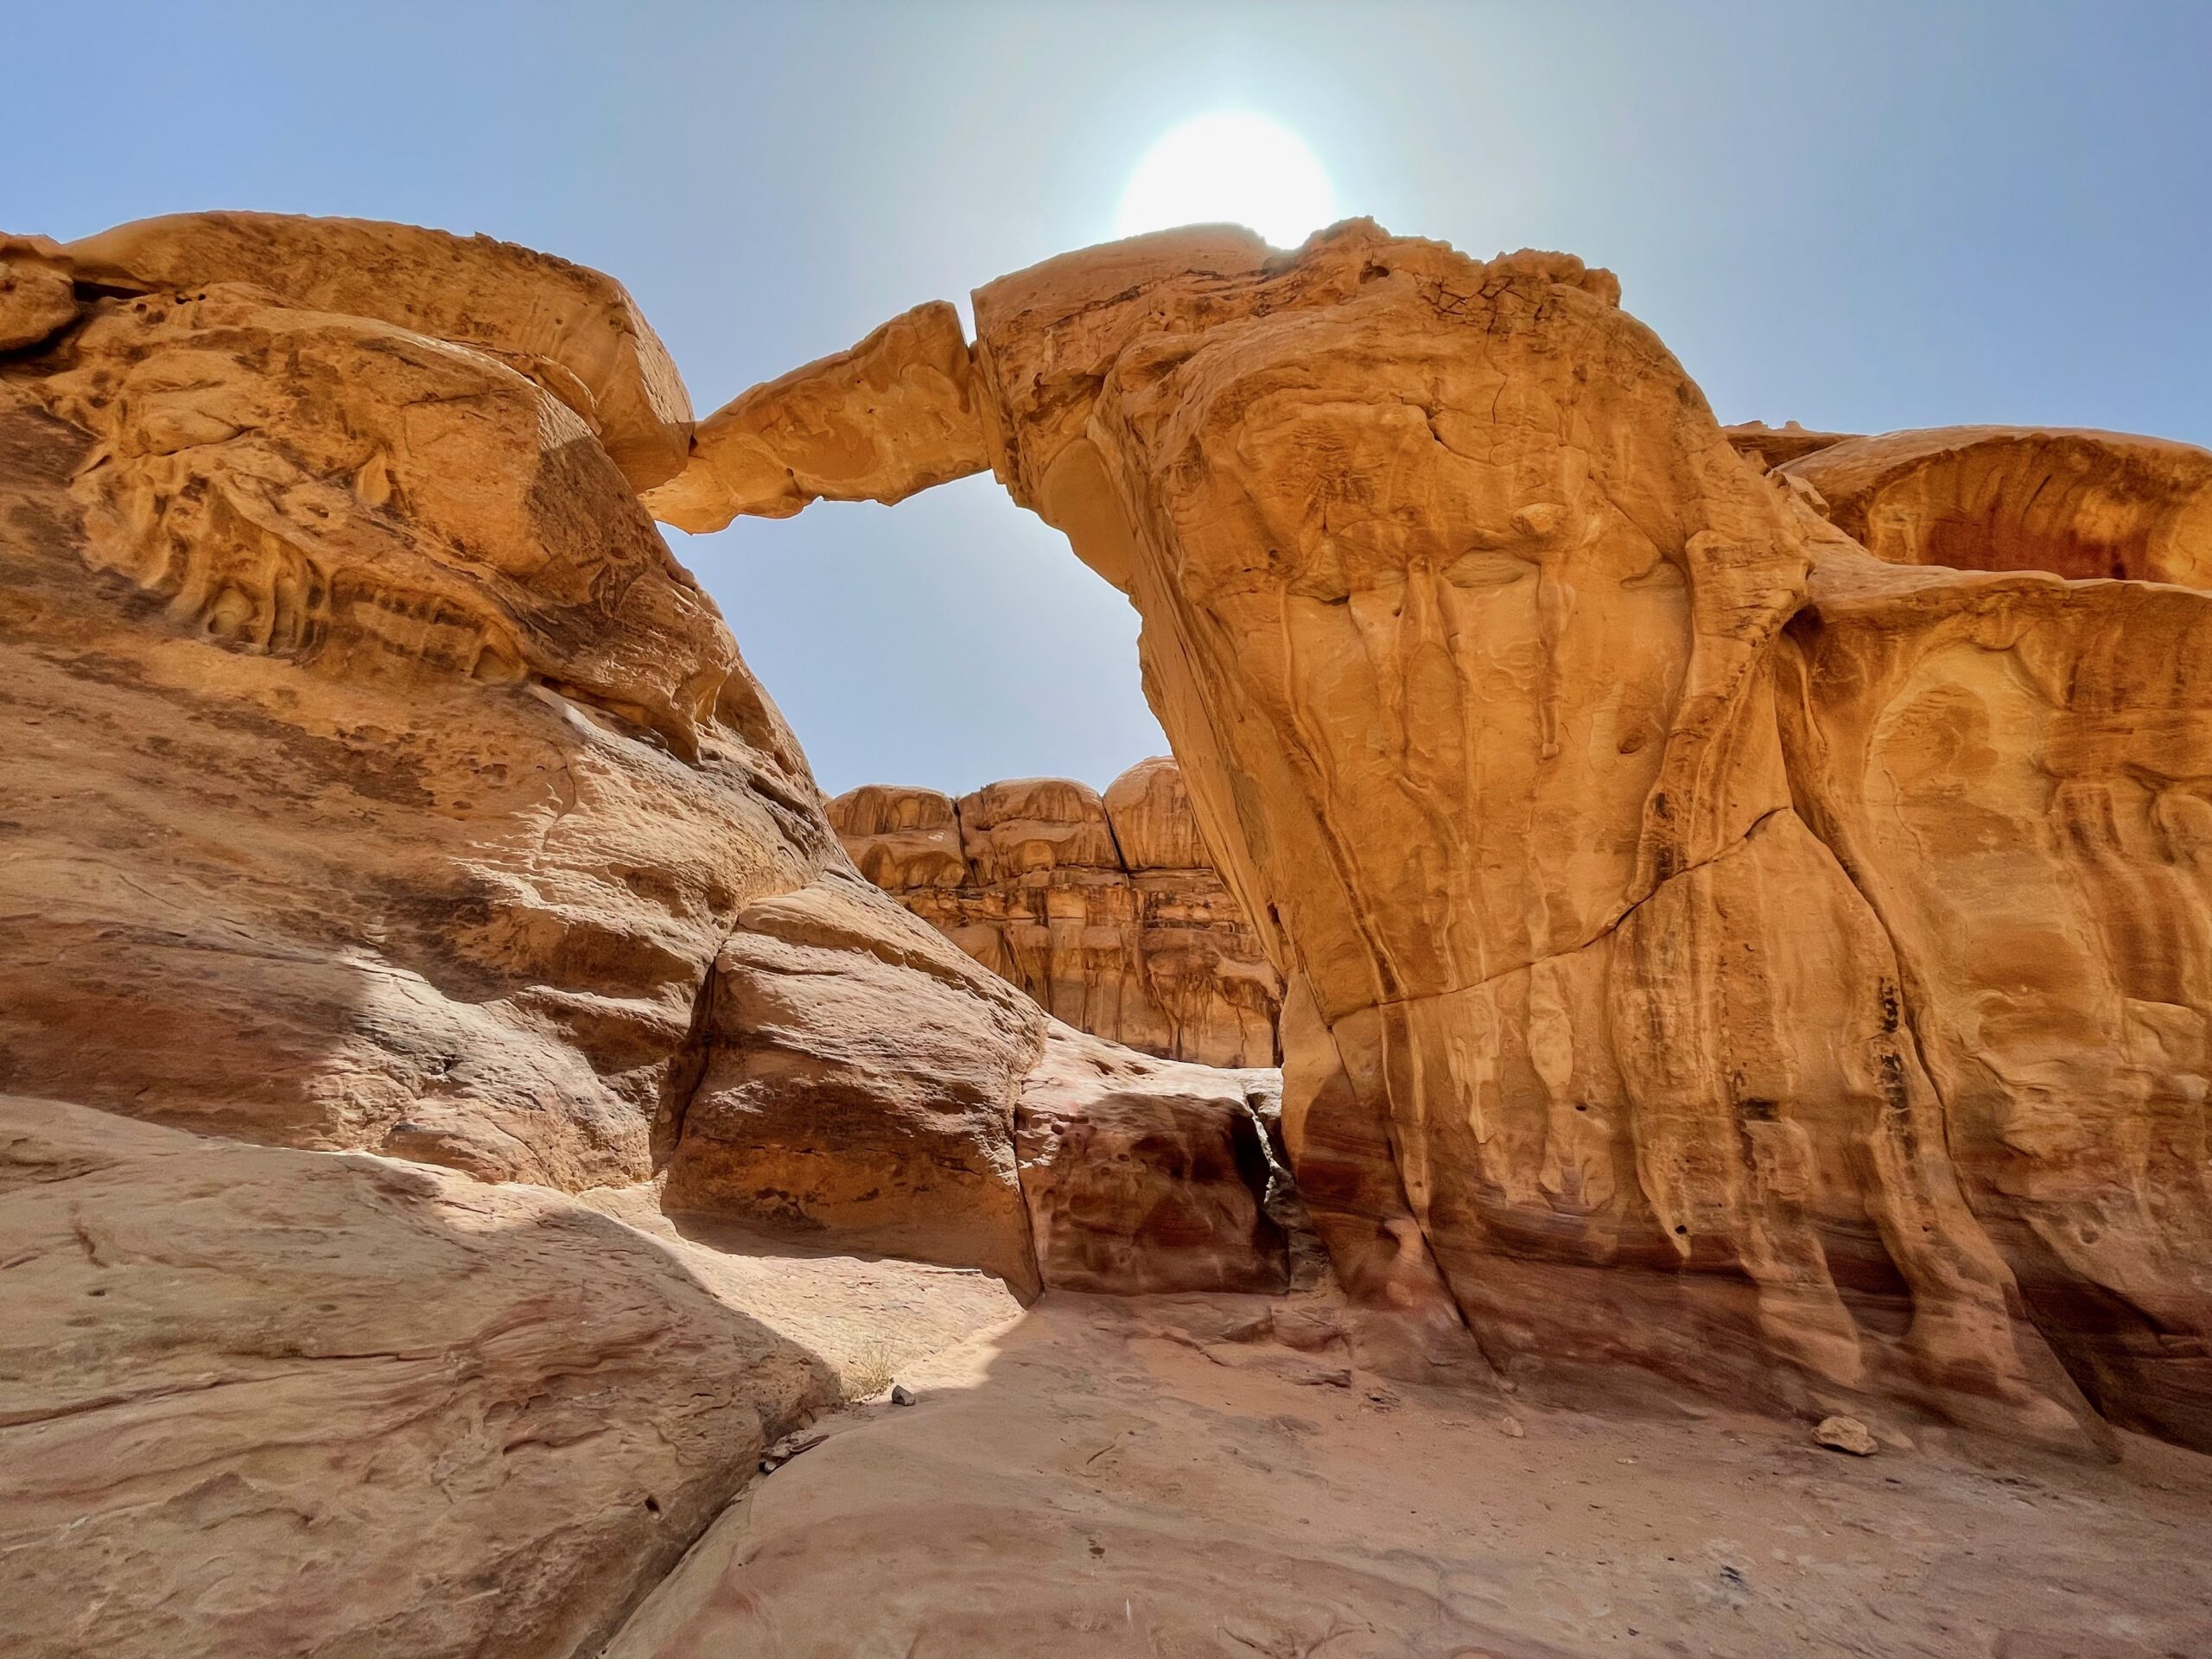 How to organize a trip to Wadi Rum on your own? Our own experience in Jordanian desert and practical tips.